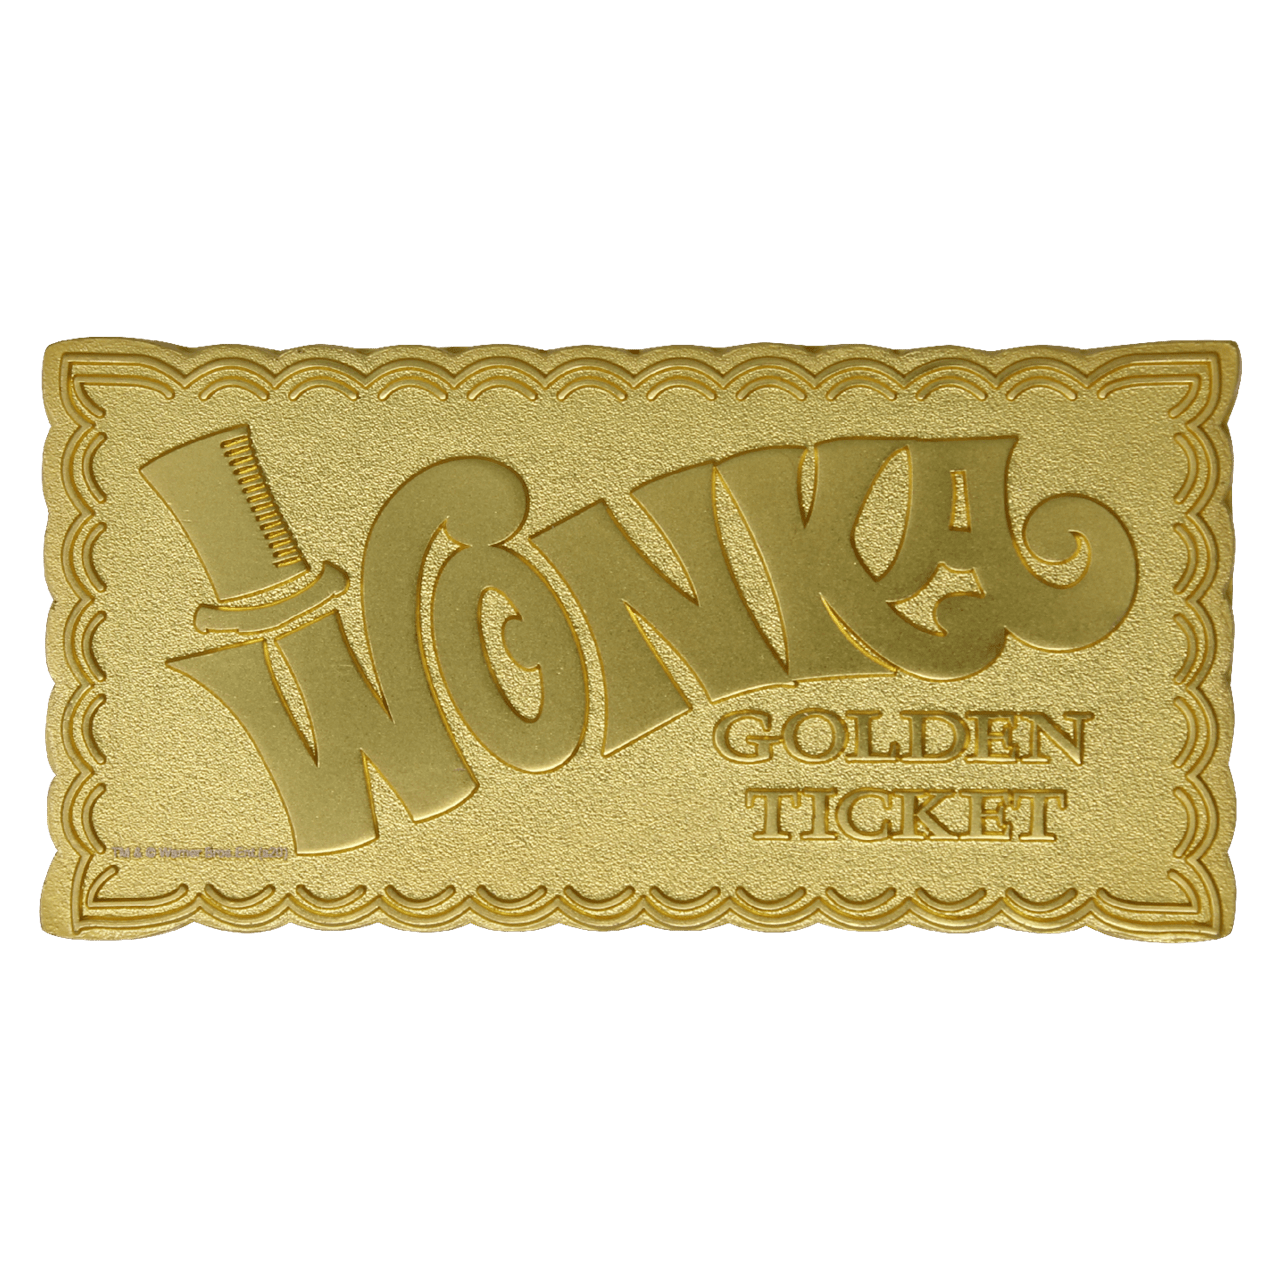 willy-wonka-golden-ticket-limited-edition-collectible-pop-culture